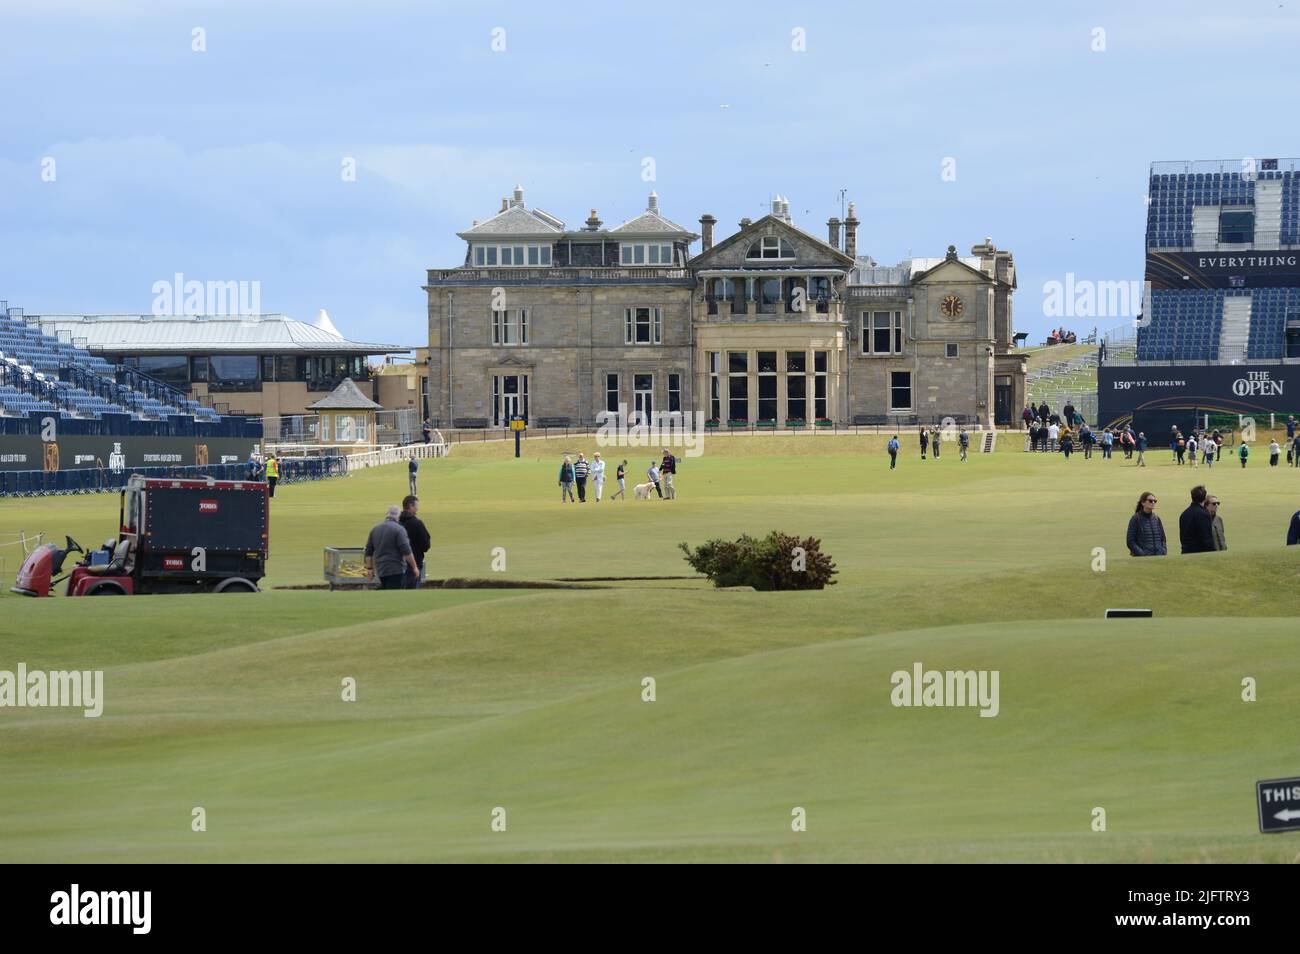 Preparations as at 5 July for the 150th Open Golf Championship, St Andrews, Scotland, just a few days to go for the start. Clubhouse with stands eithe Stock Photo